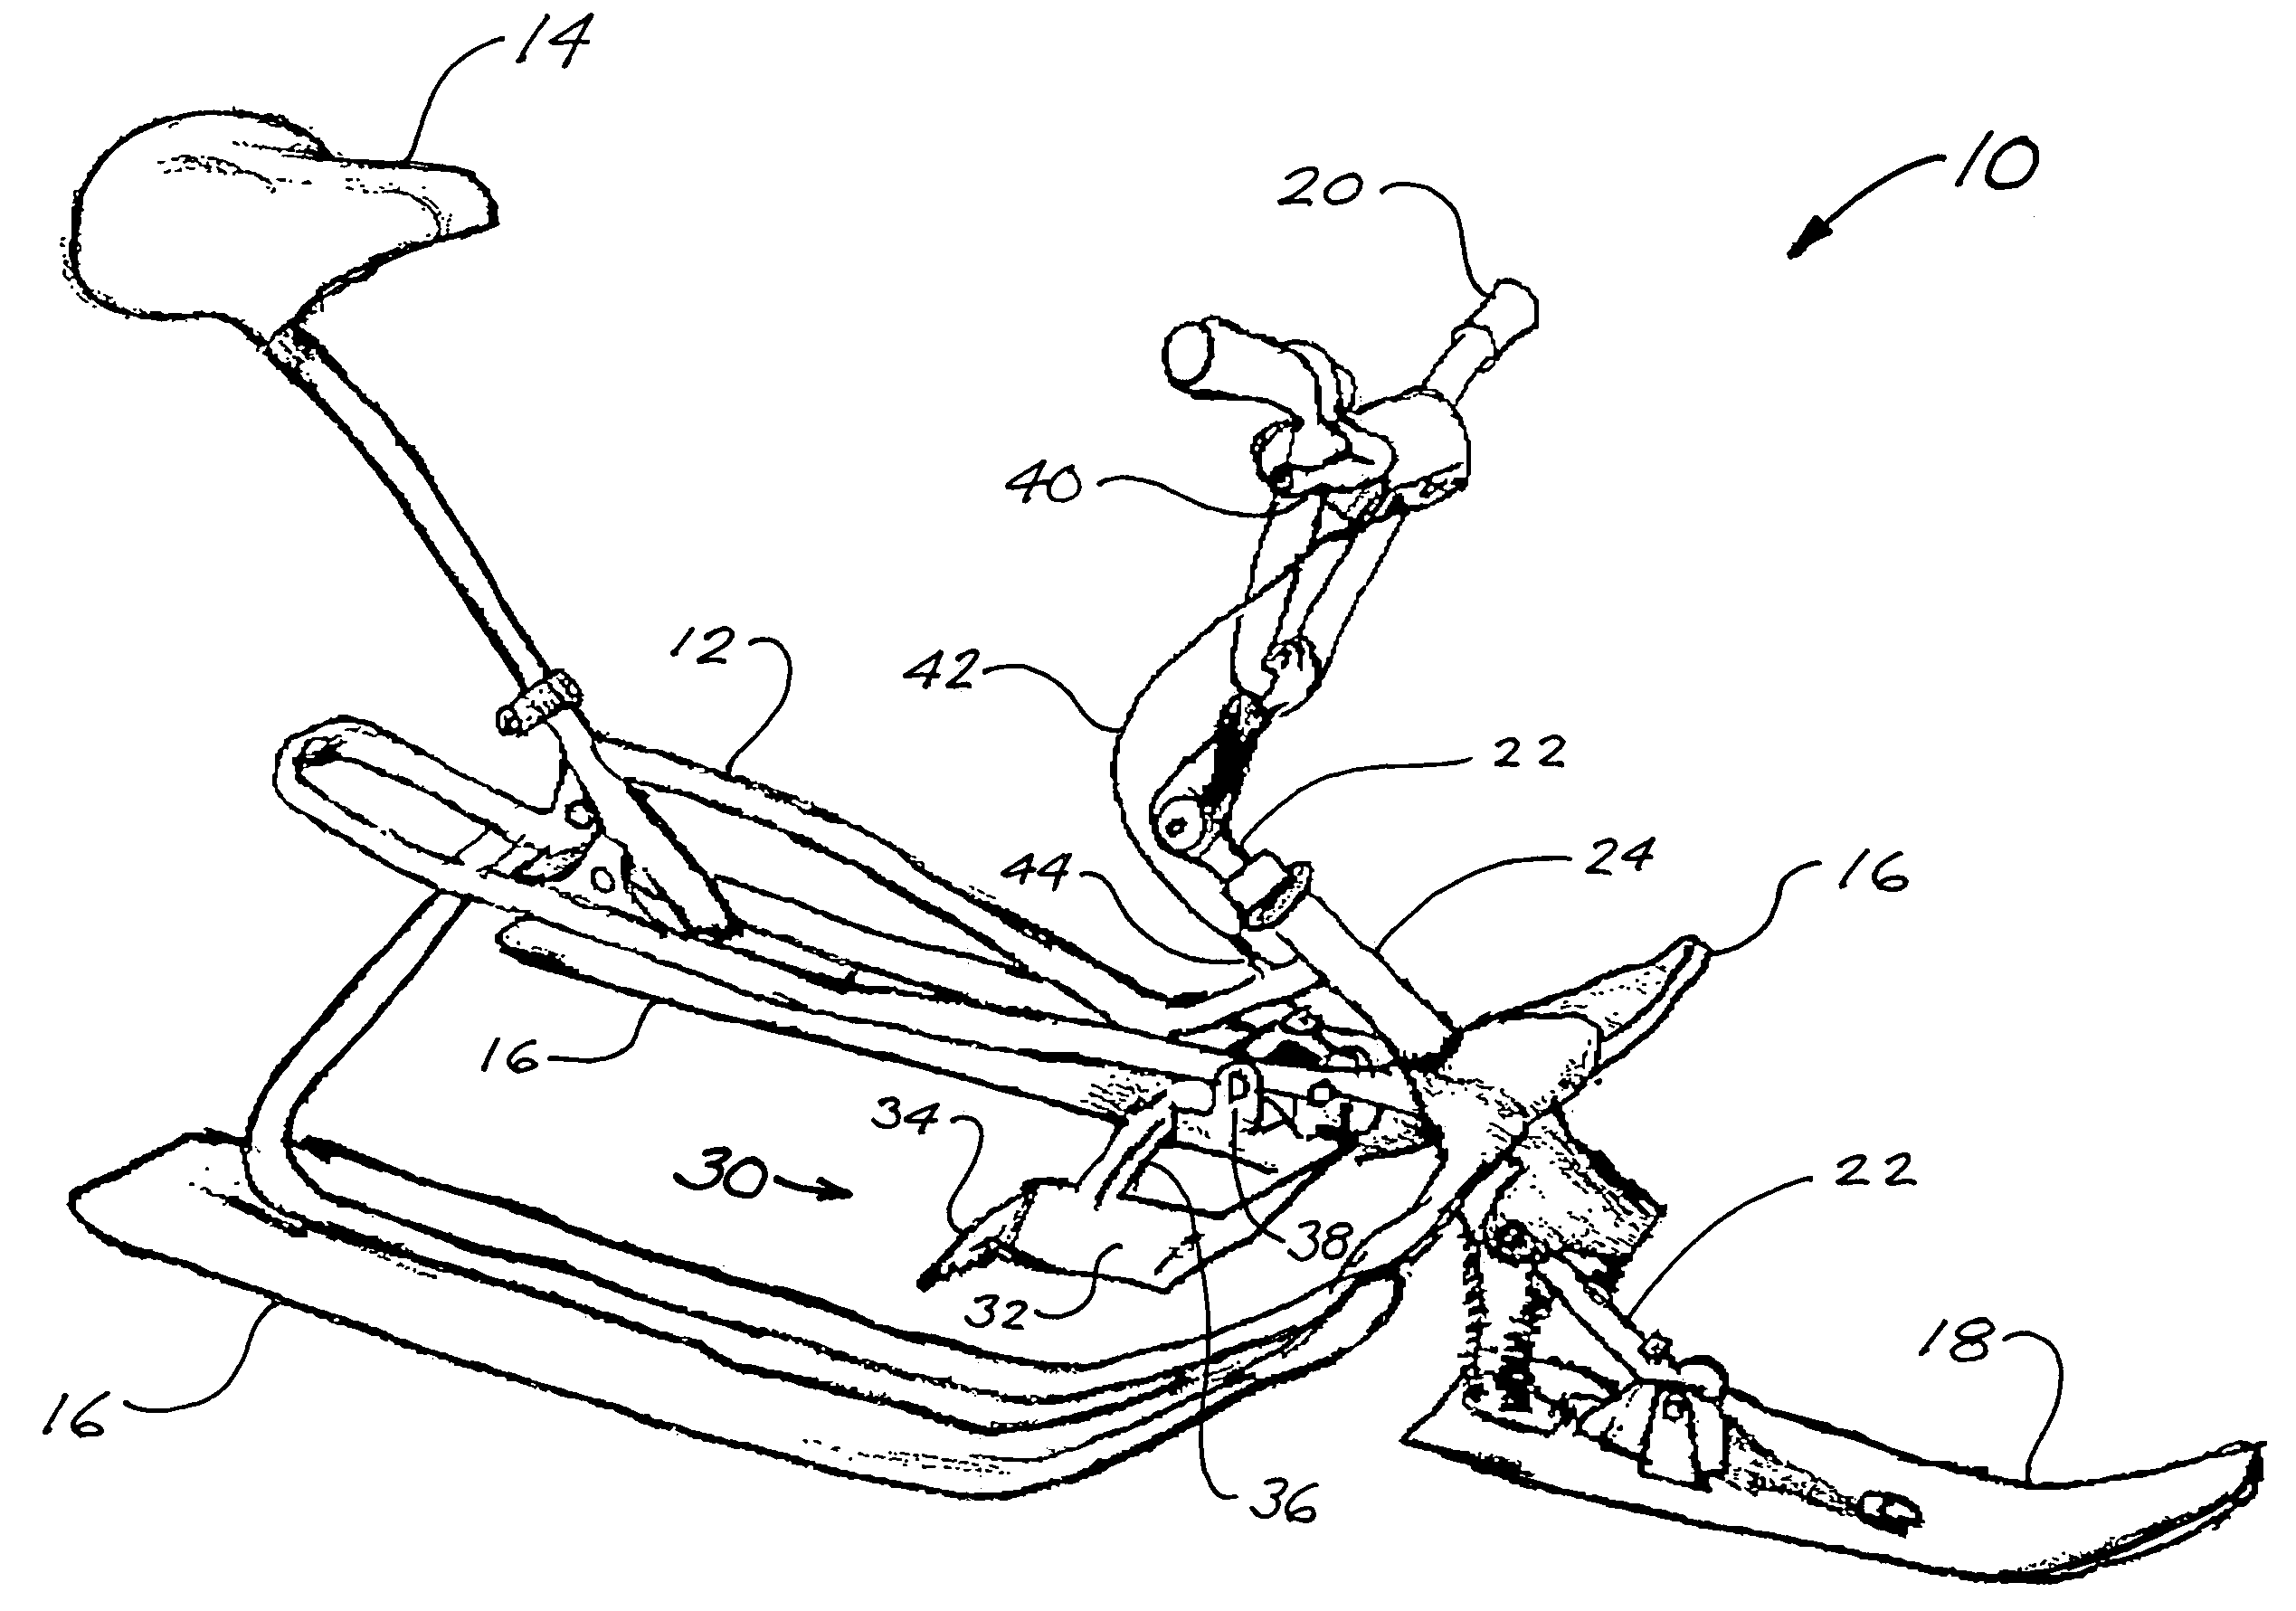 Snow sled with dual-mode braking system